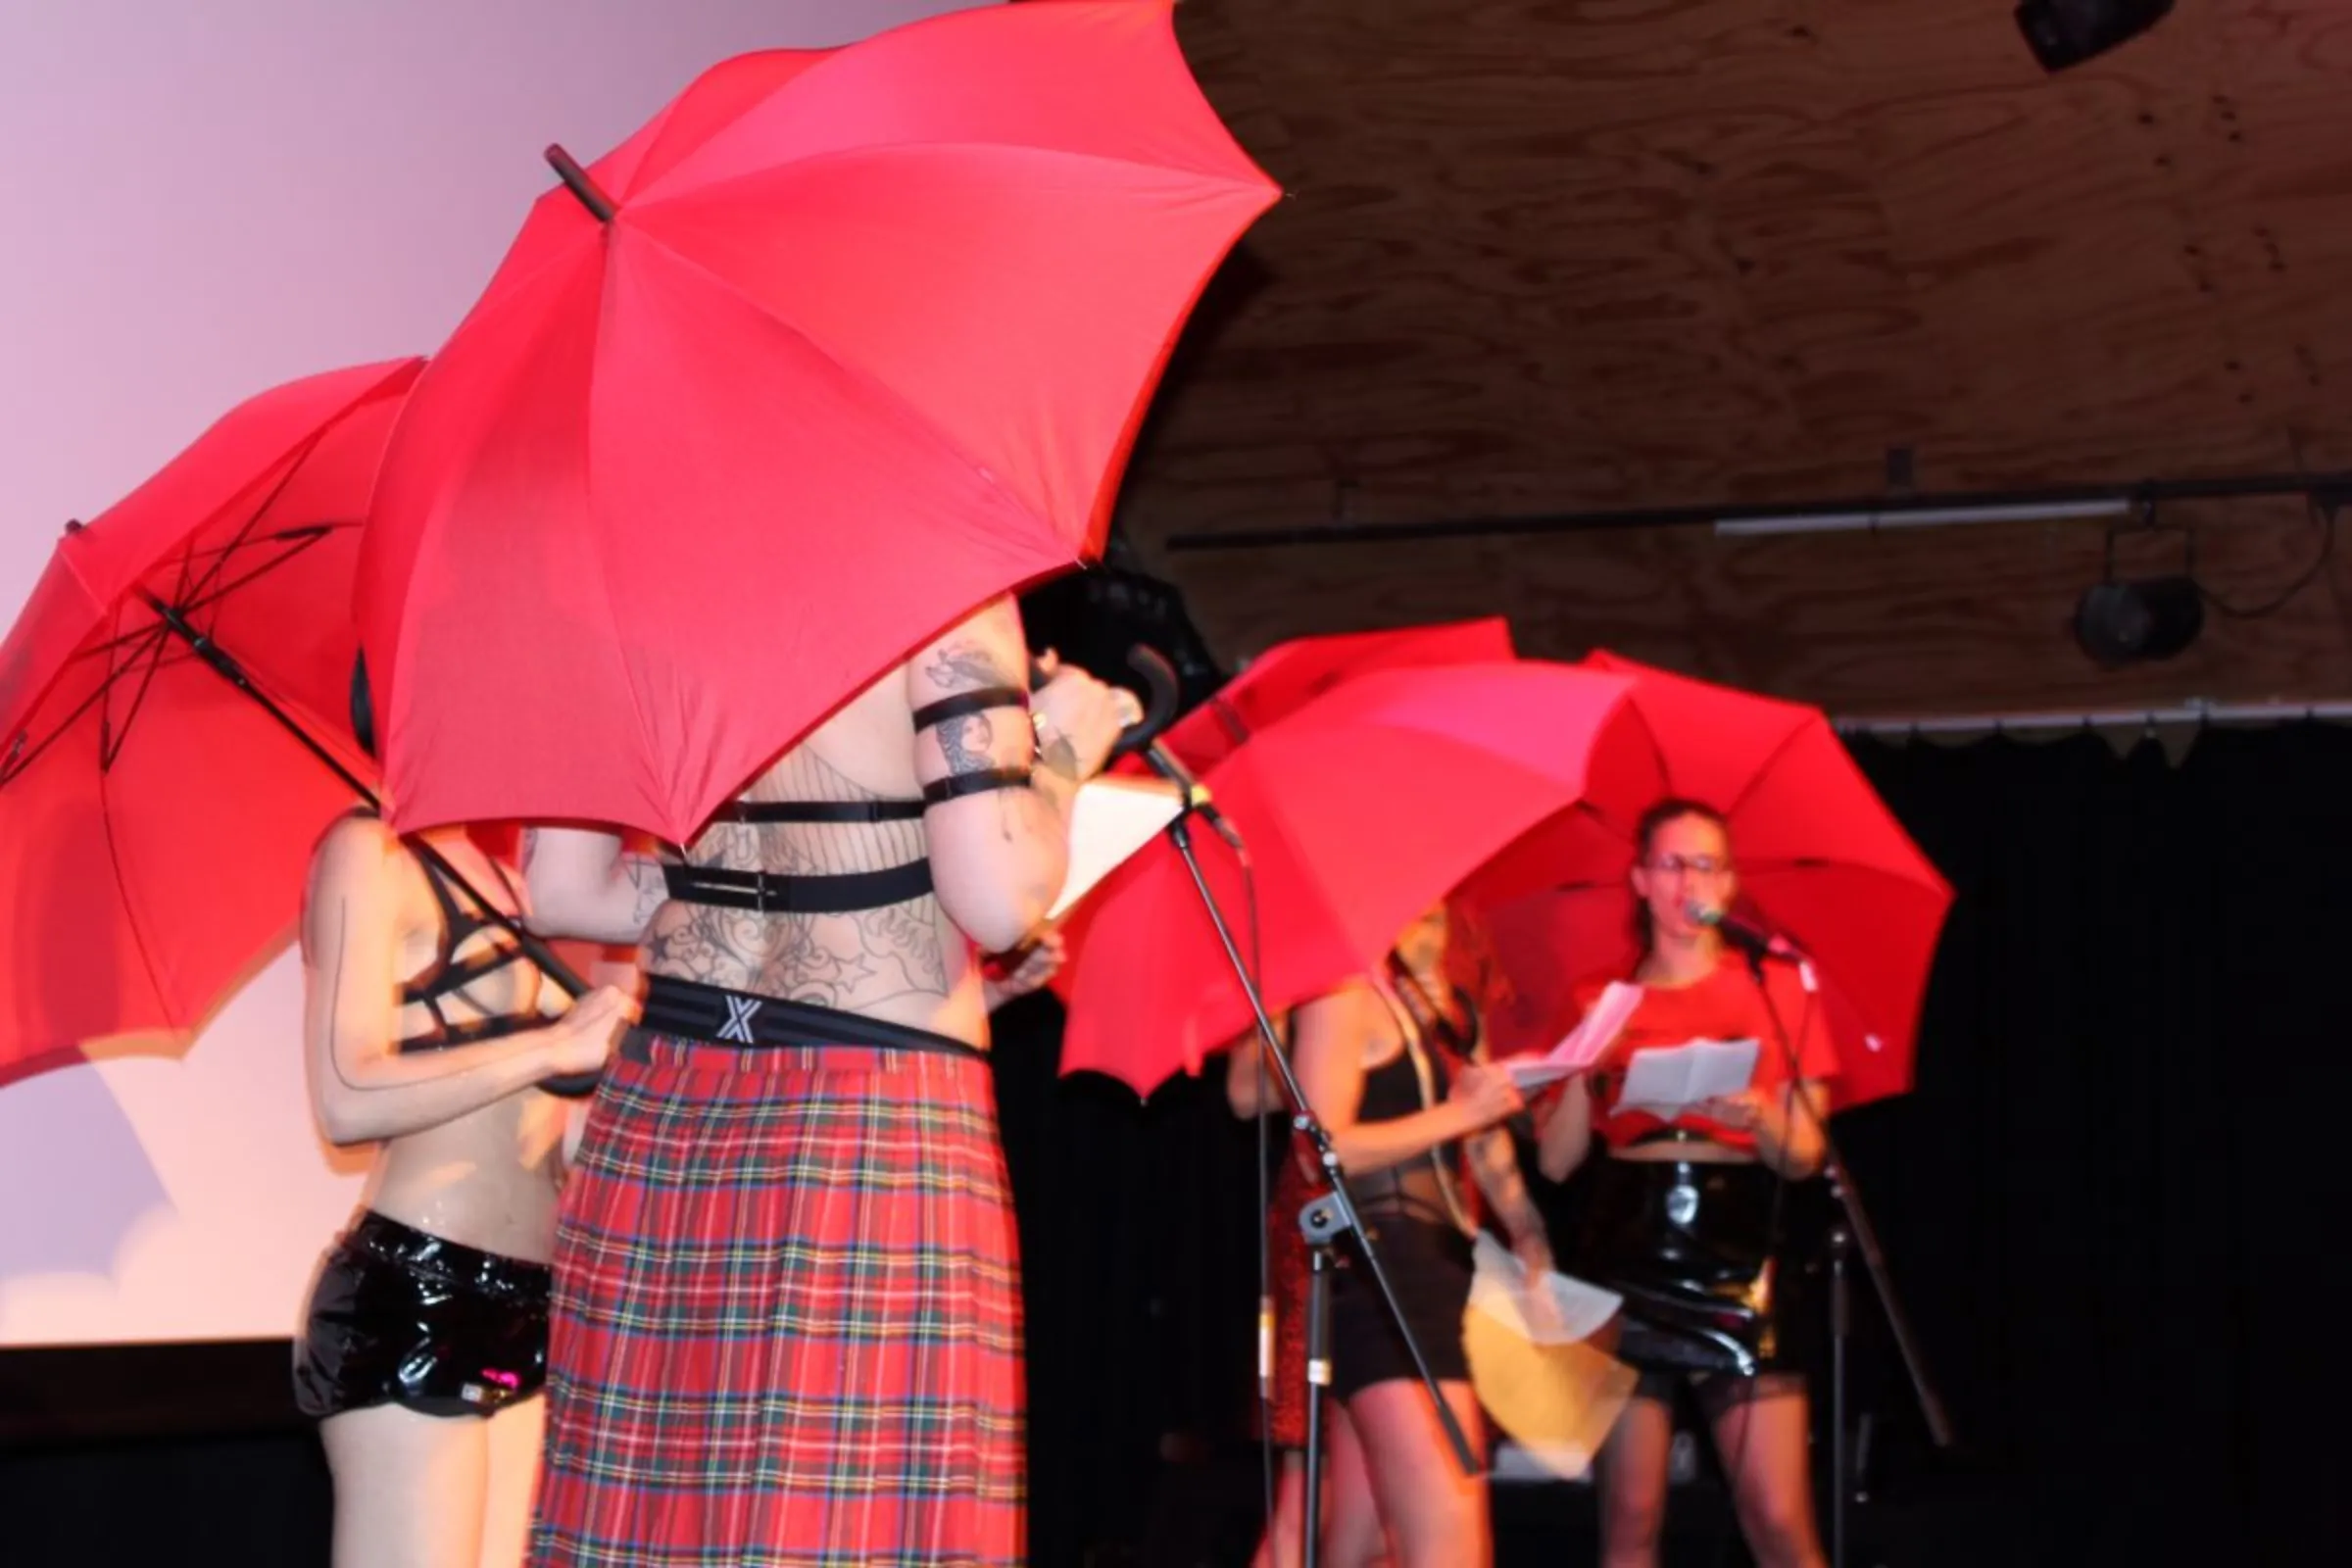 Sex workers perform songs at an event to celebrate decriminalisation Brussels, Belgium. May 11, 2022